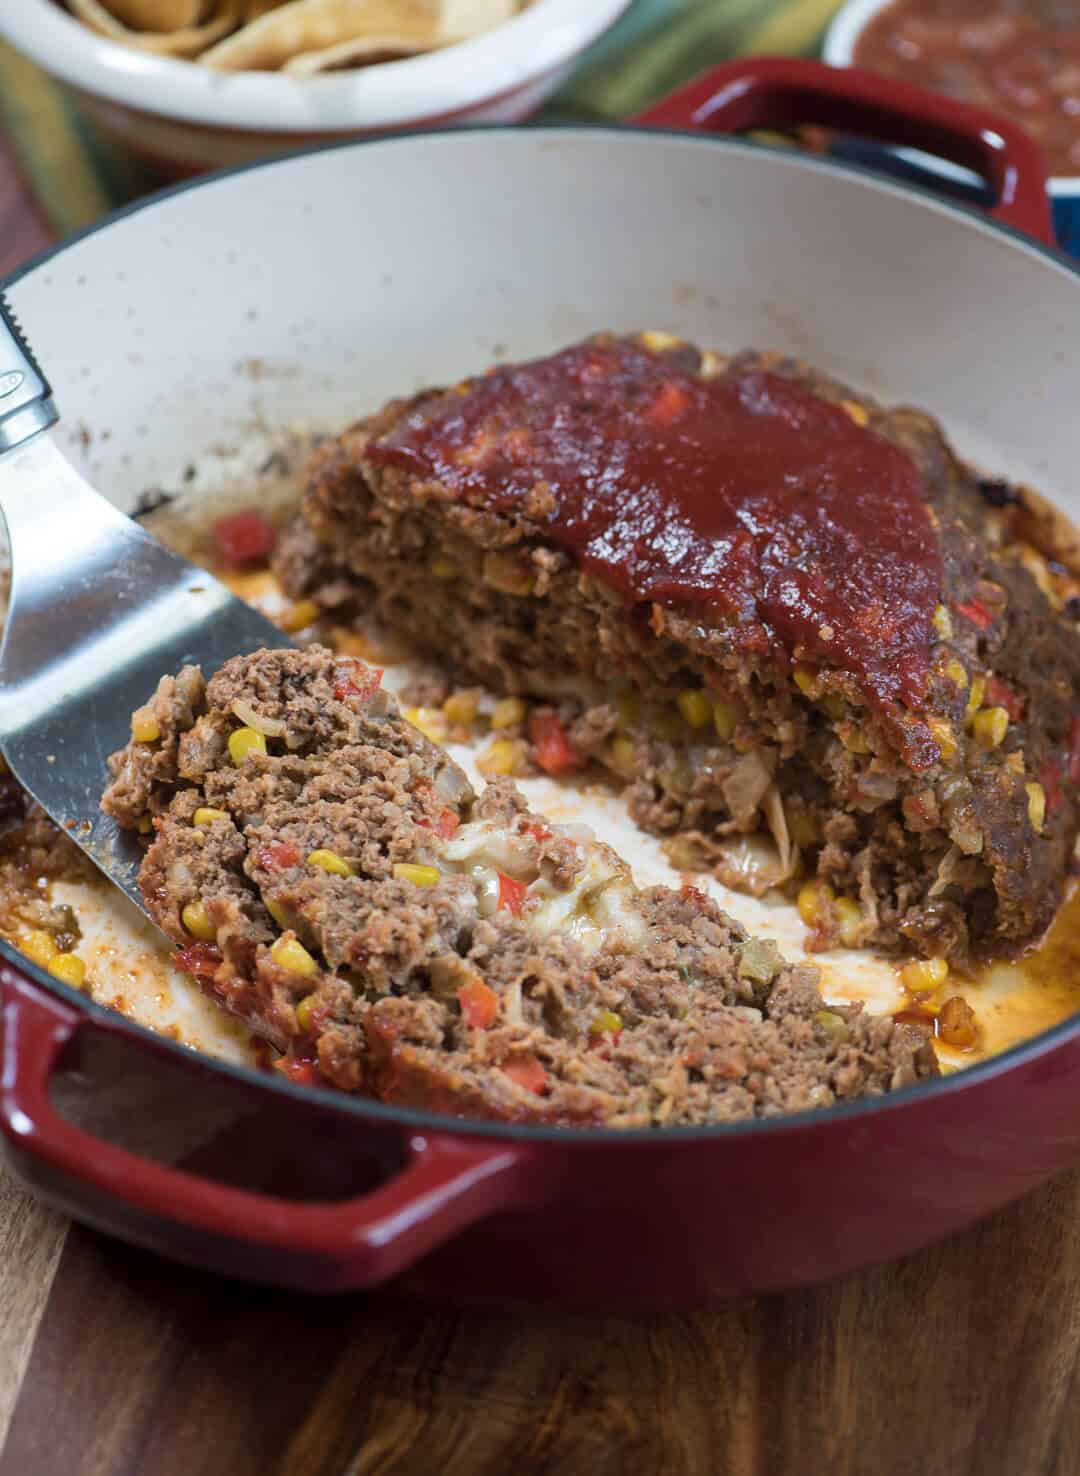 Tex-mex cheese stuffed meatloaf with smoky chili glaze